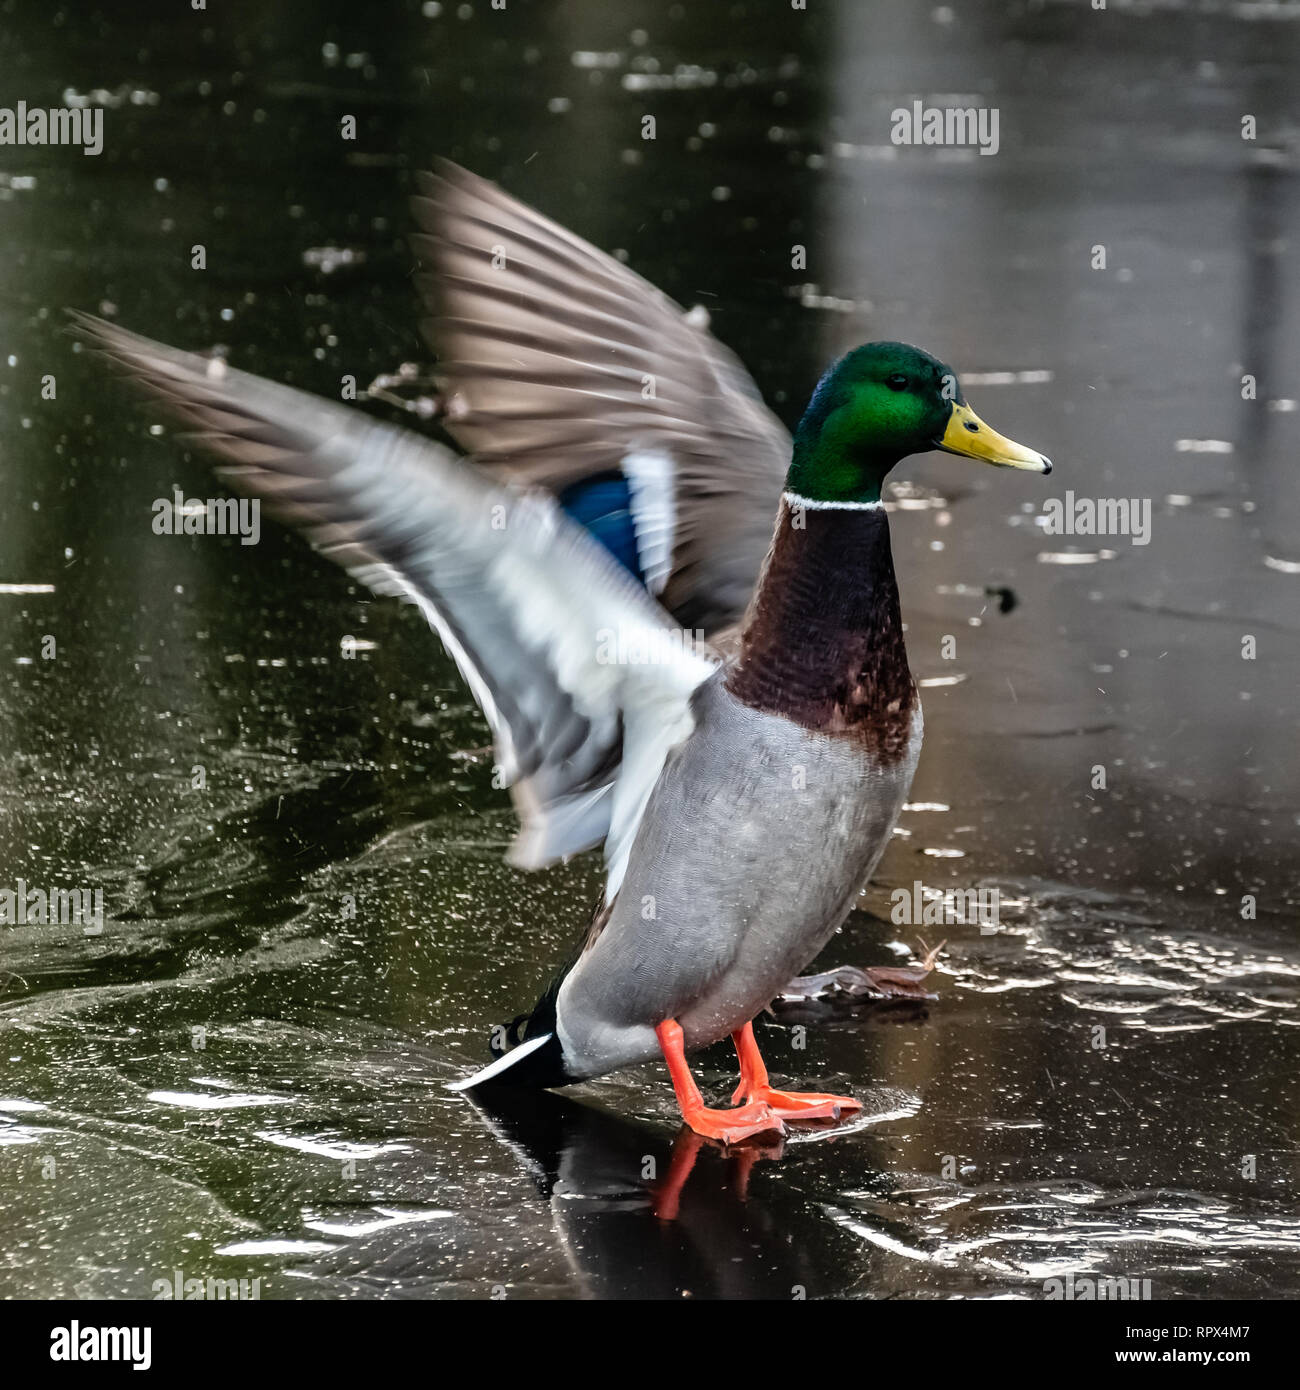 Mallard duck flapping his wings, Vancouver, British Columbia, Canada Stock Photo